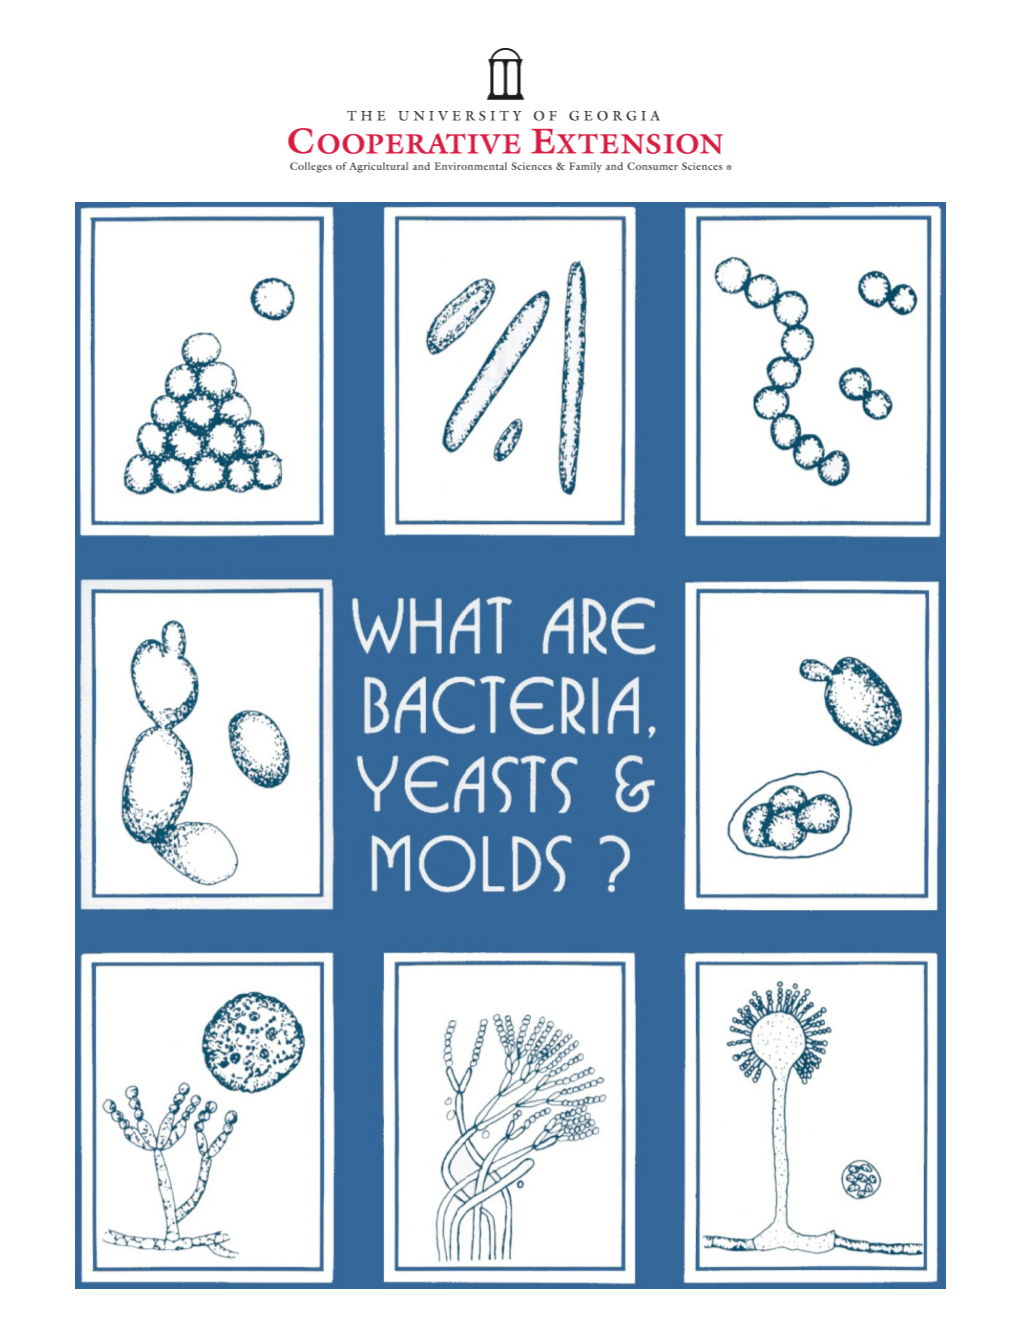 What Are Bacteria, Yeasts and Molds?